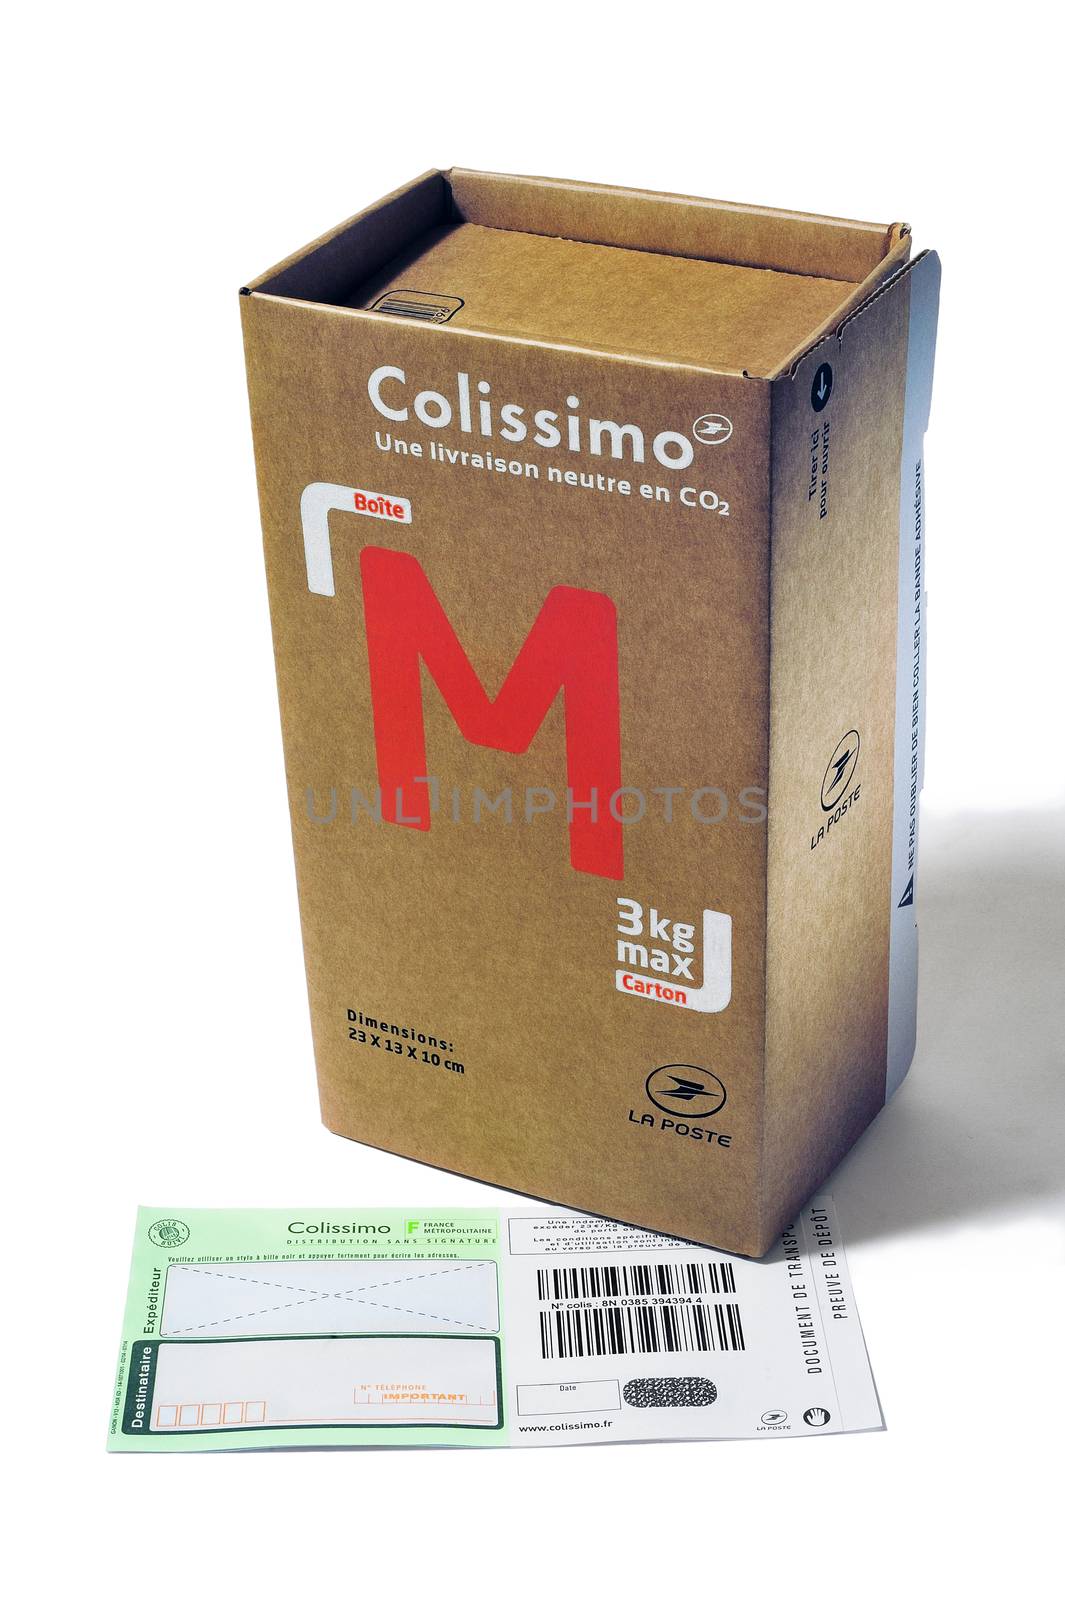 Mailing carton sold by the French Post by gillespaire